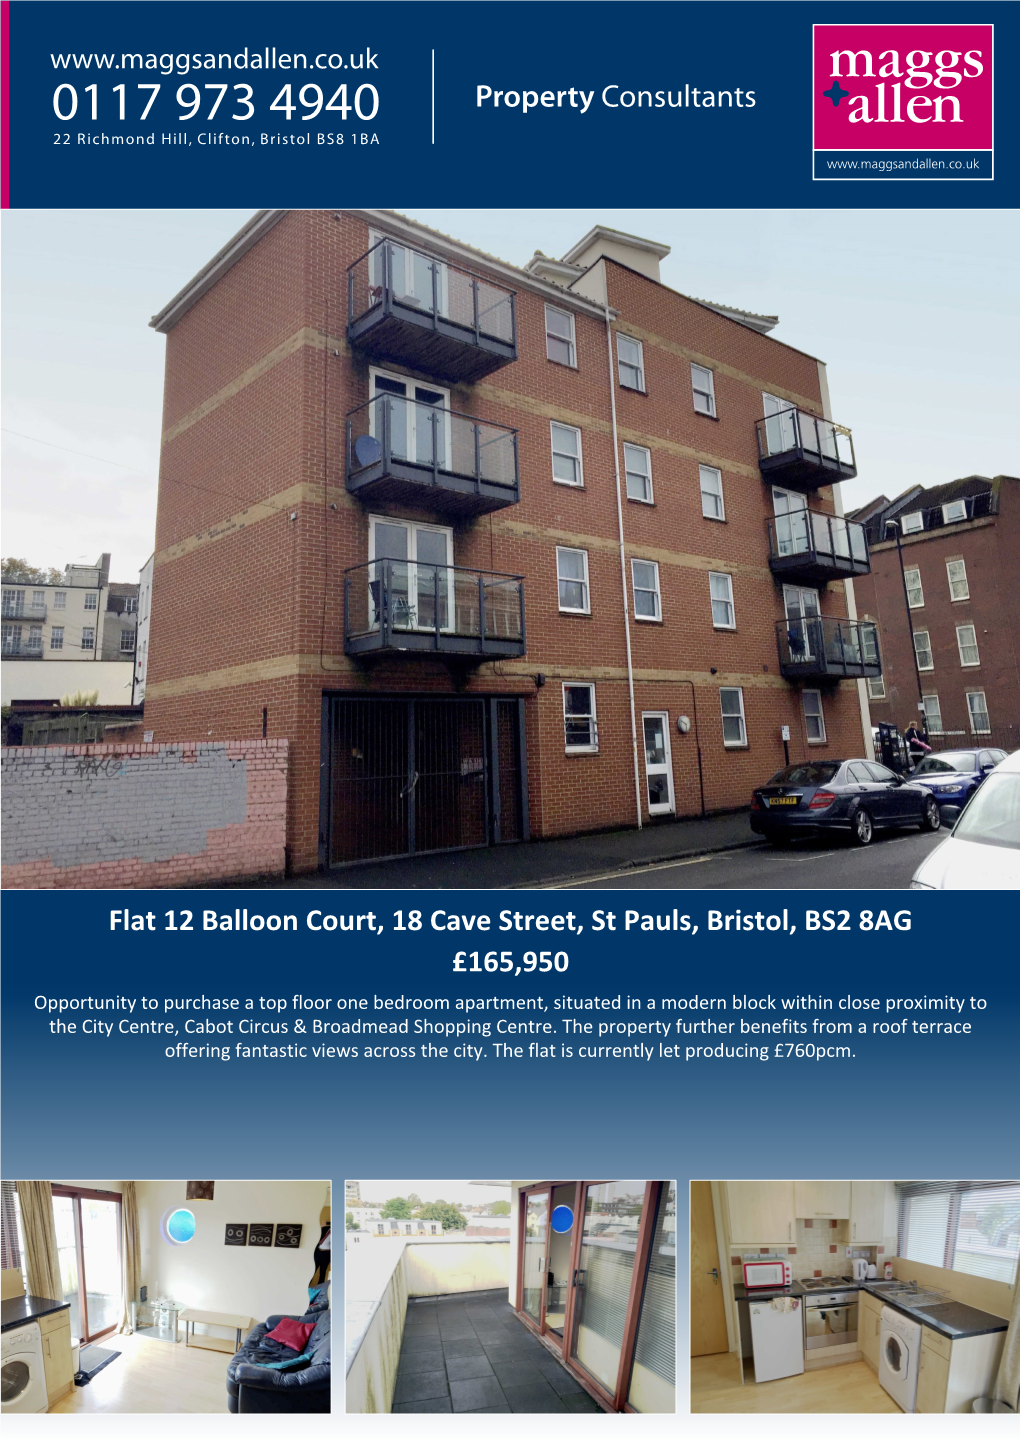 Property Consultants Flat 12 Balloon Court, 18 Cave Street, St Pauls